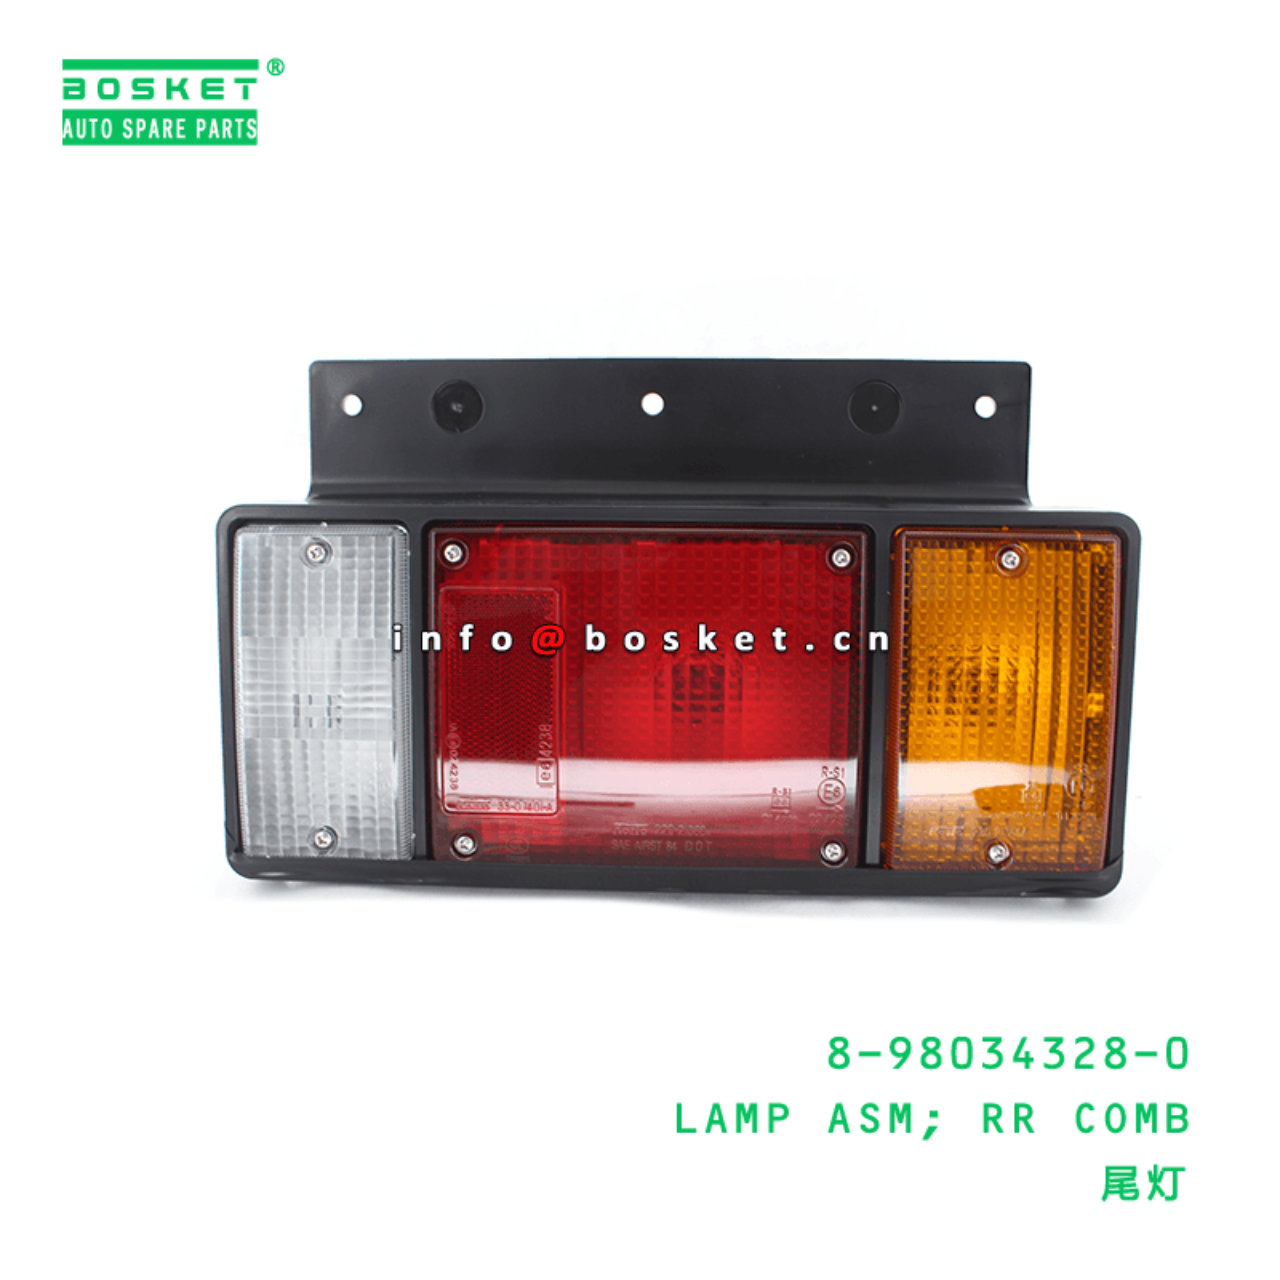 8-98034328-0 Rear Comb Lamp Assembly 8980343280 Suitable for ISUZU 700P 4HK1